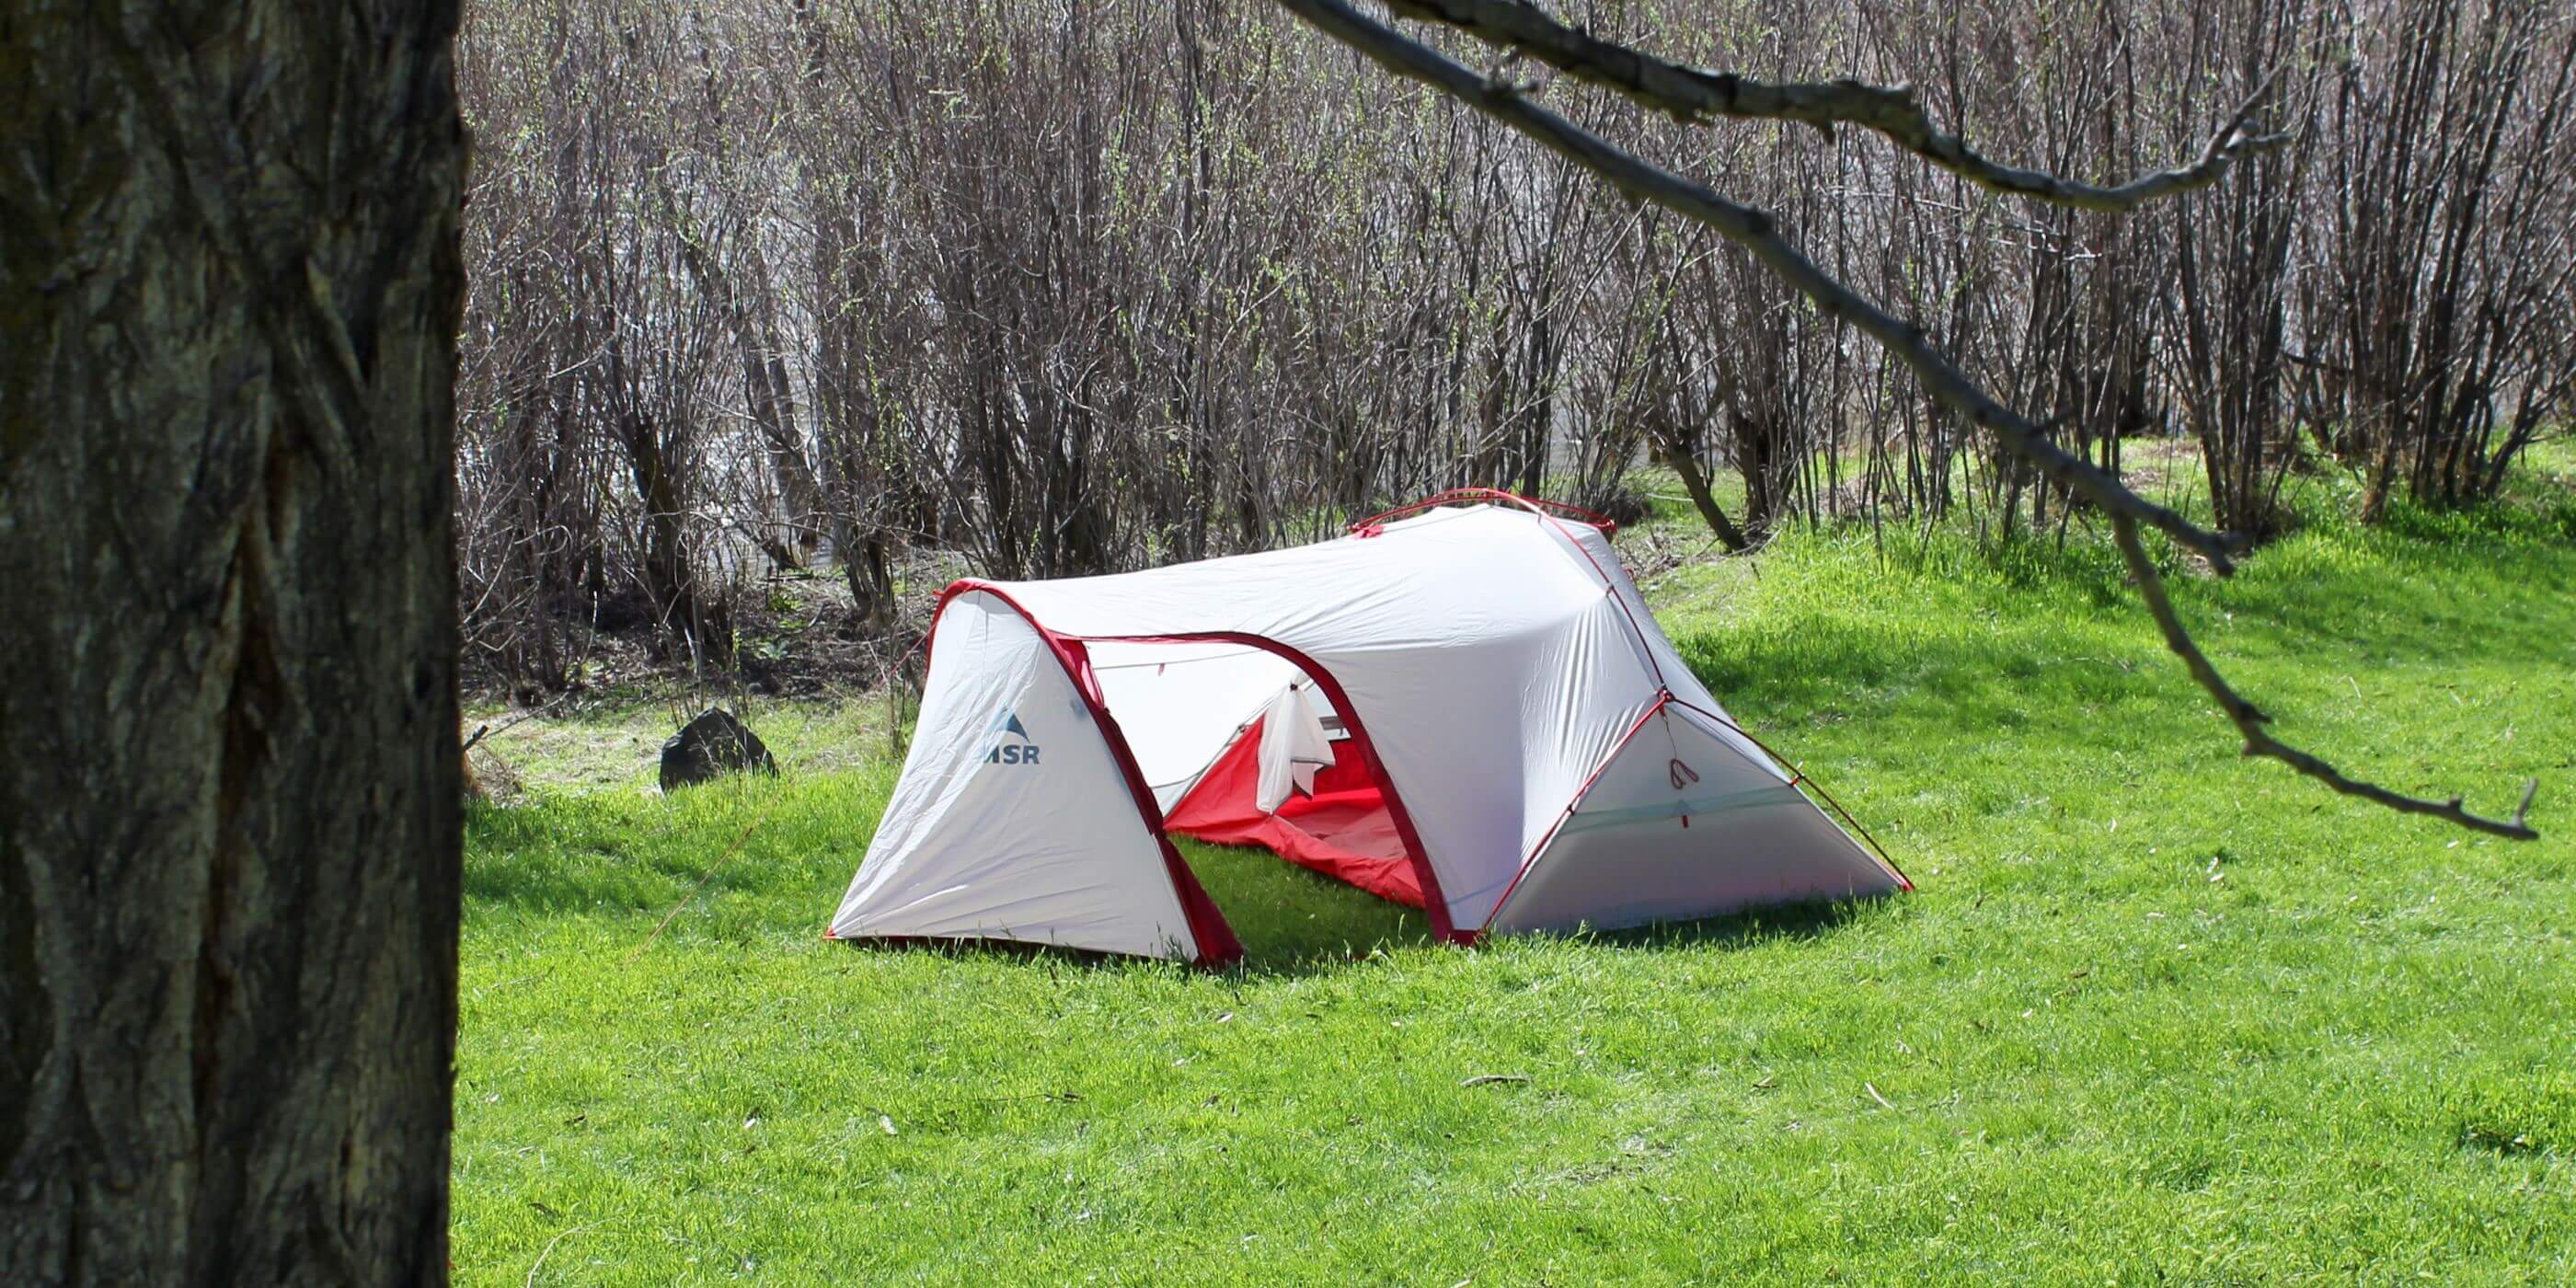 This photo shows the MSR Hubba Tour 2 Tent setup outside.